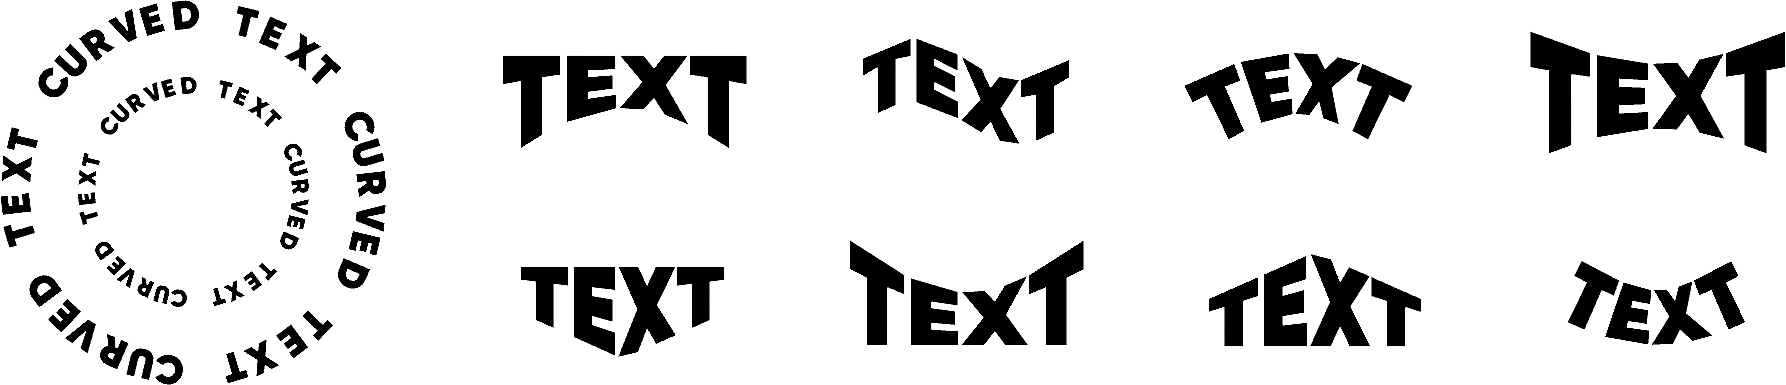 Text shapes